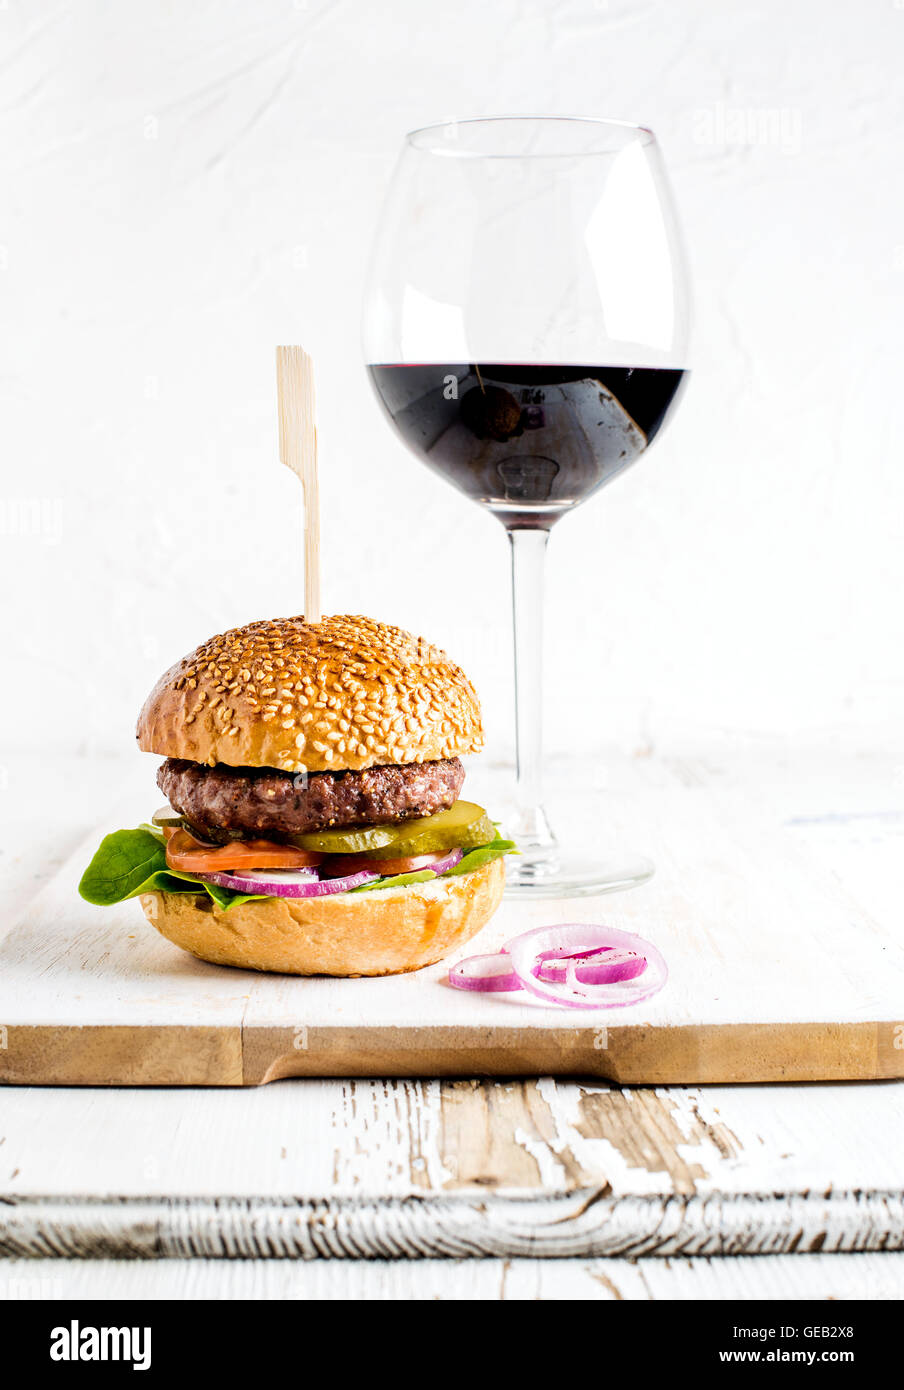 Fresh homemade burger on wooden serving board with onion rings and glass of red wine Stock Photo